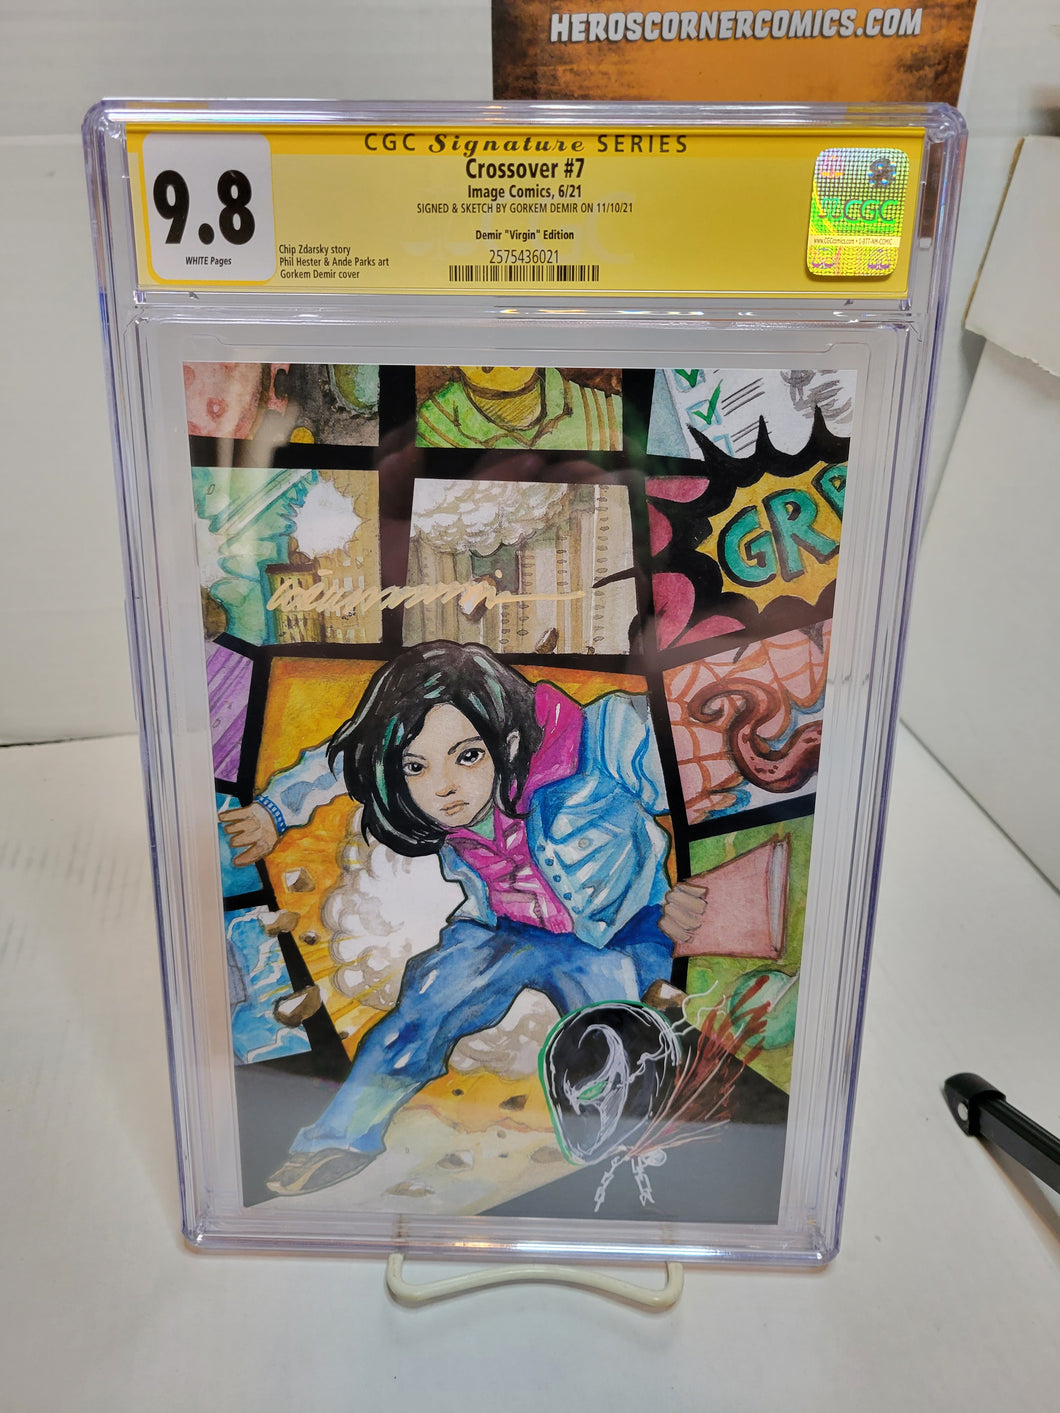 CrossOver 7 Demir Variant CGC SS 9.8 signed and remarked Spawn Remark